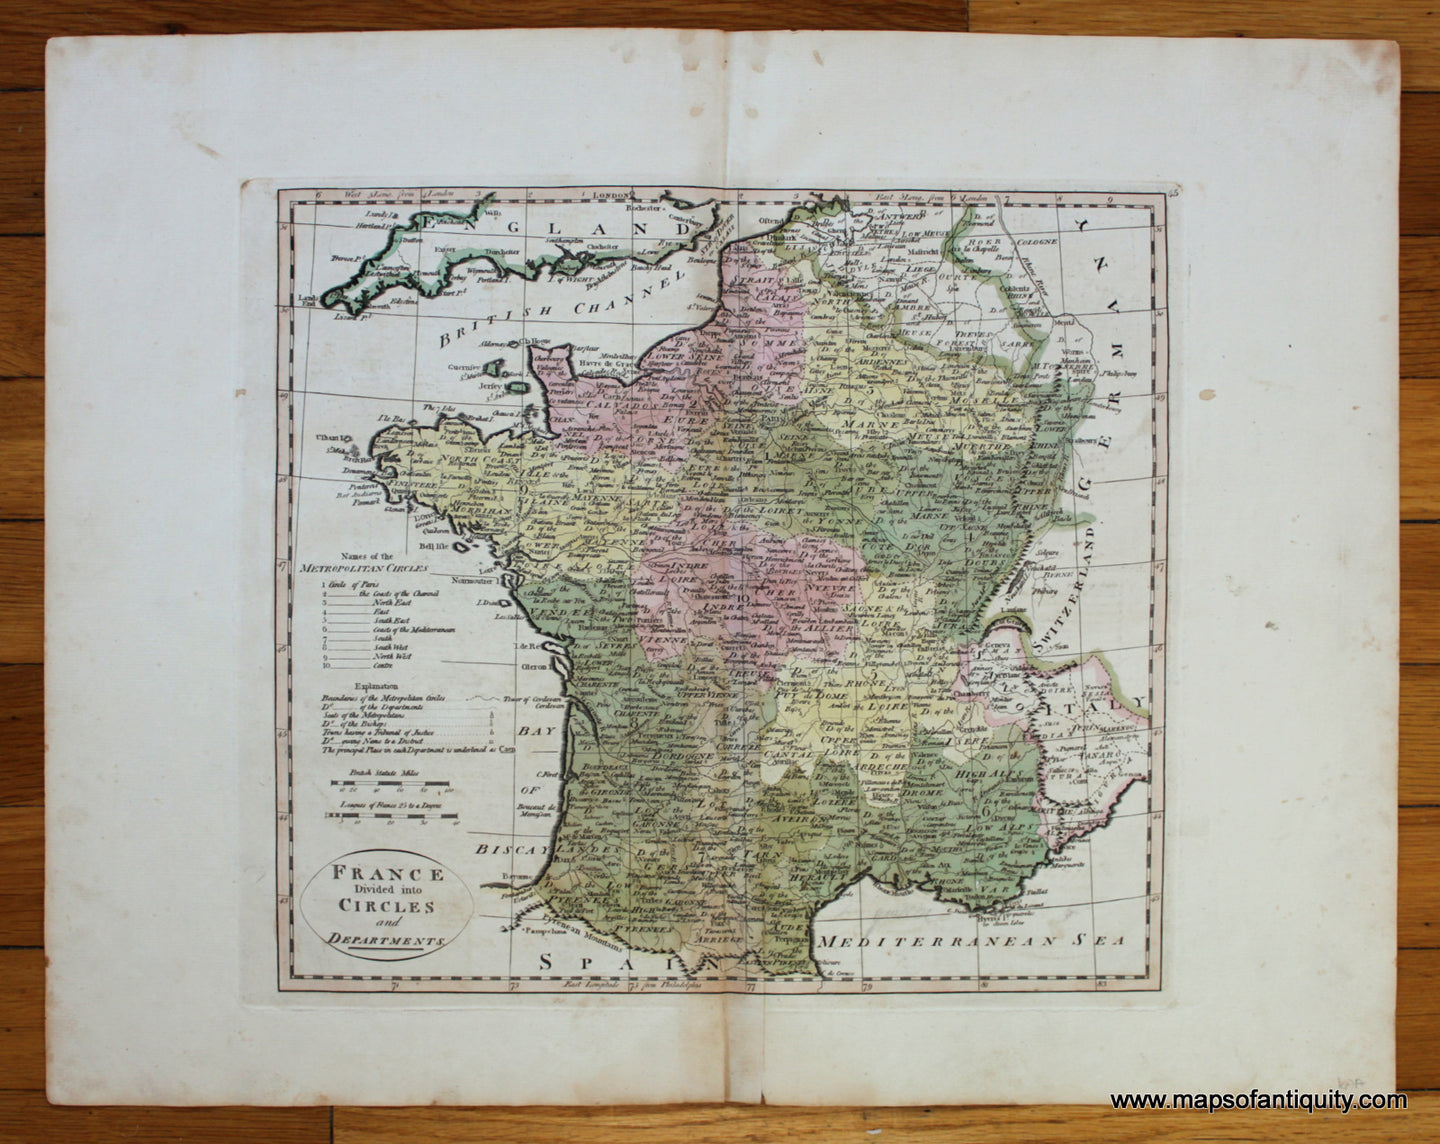 Antique-Hand-Colored-Map-France-Divided-into-Circles-and-Departments-Europe-France-1814-Carey-Maps-Of-Antiquity